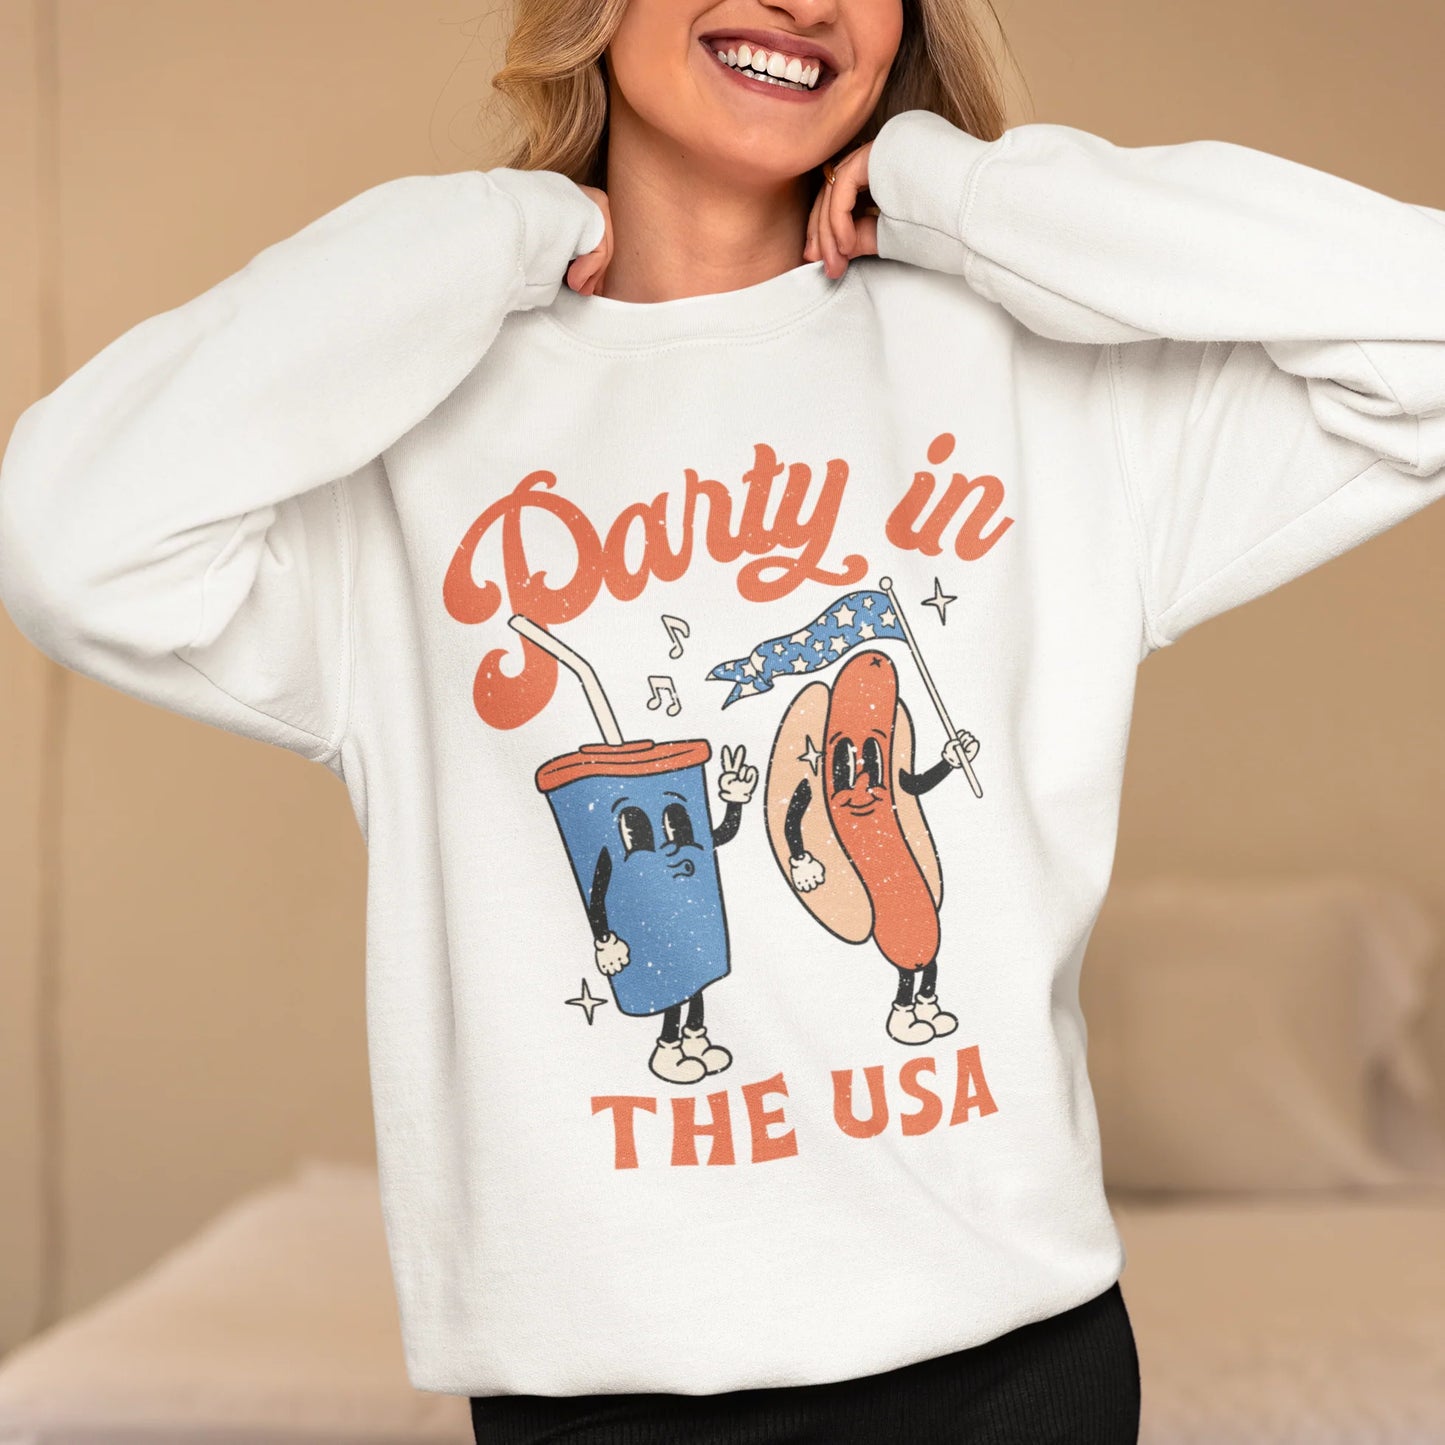 Party in the USA Sweatshirt